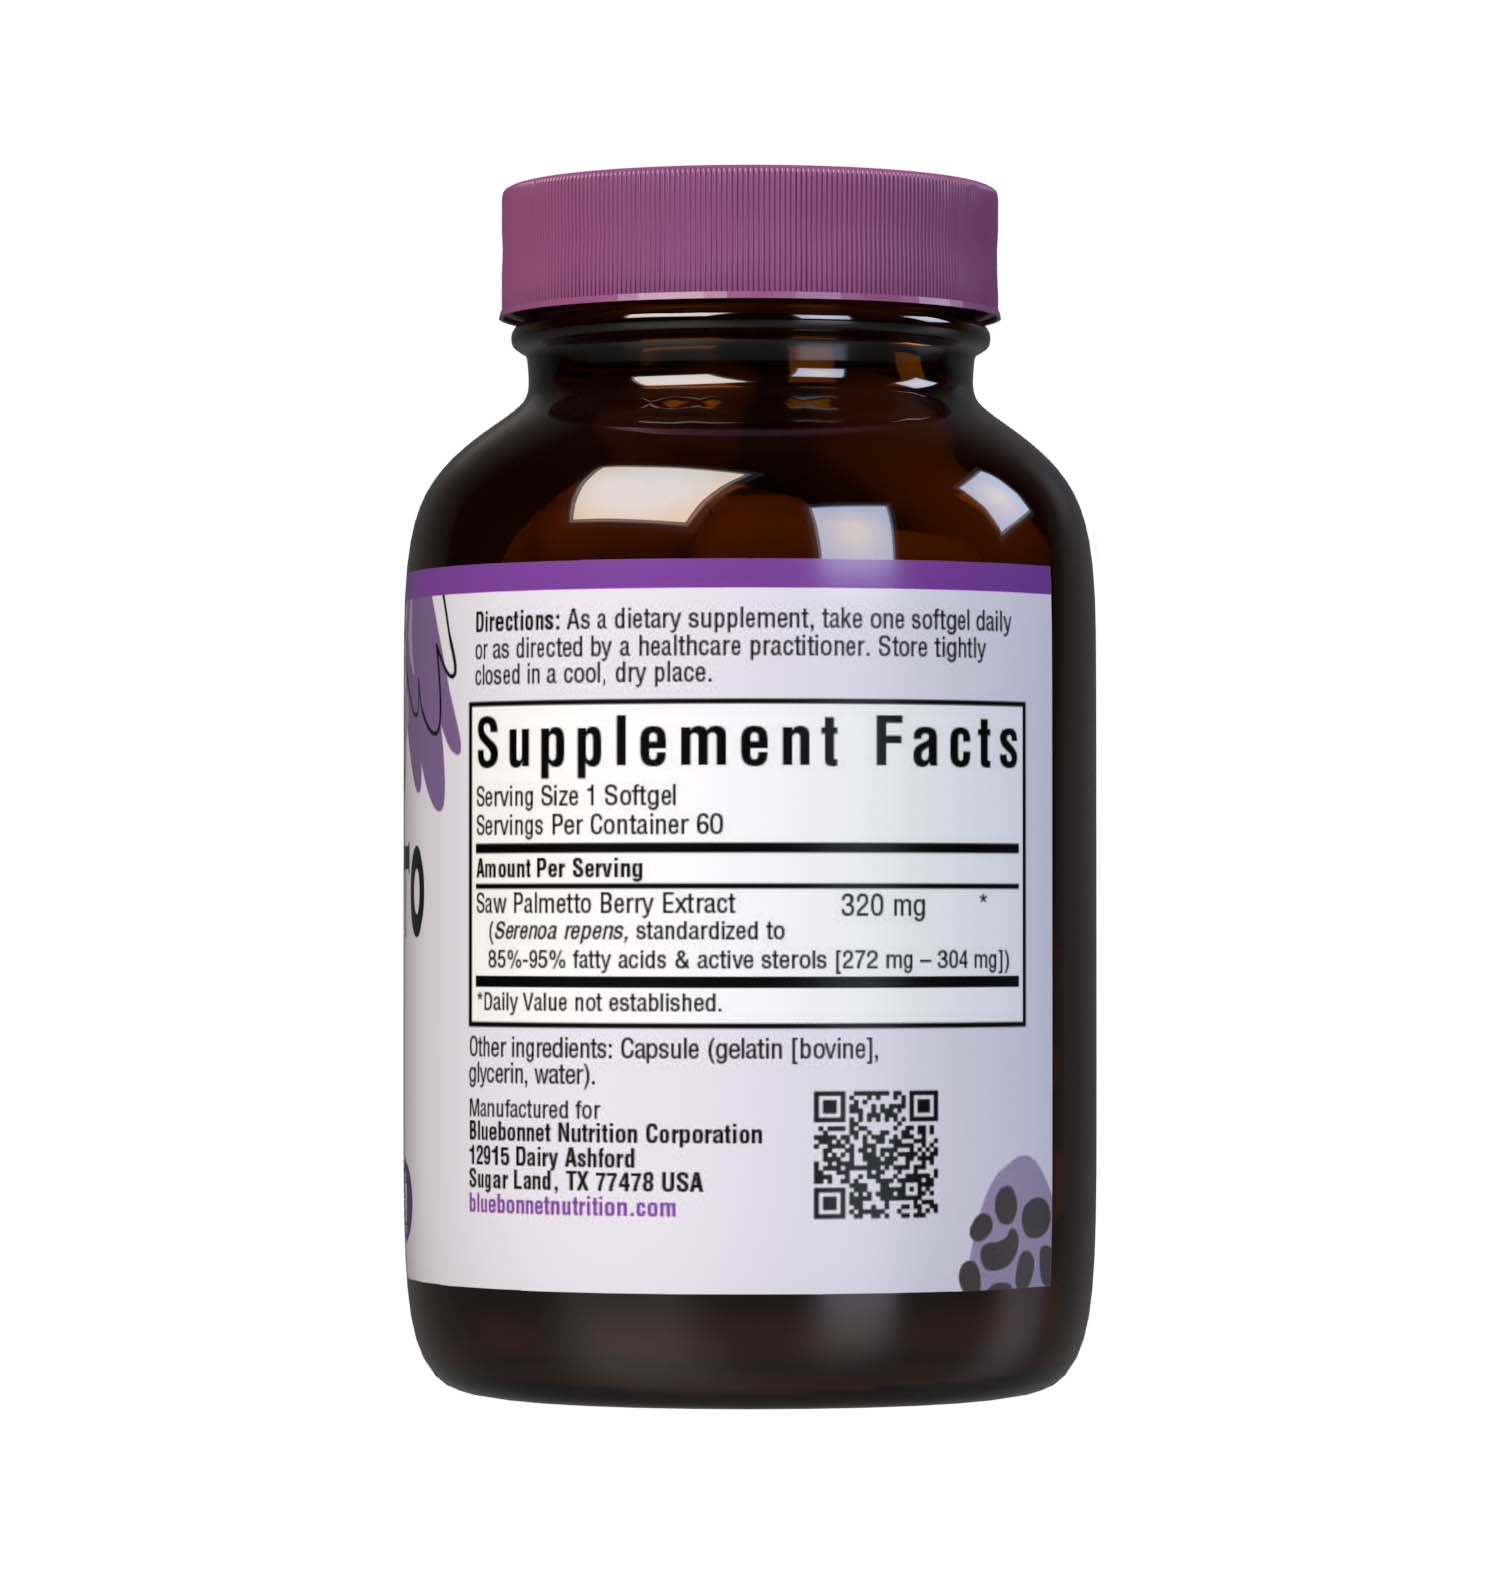 Bluebonnet’s Extra-Strength Saw Palmetto Berry Extract 60 Softgels contain a standardized extract of fatty acids and active sterols, the most researched active constituents found in saw palmetto. A clean and gentle supercritical CO2 extraction method is employed to capture and preserve saw palmetto’s most valuable components. Supplement facts panel. #size_60 count